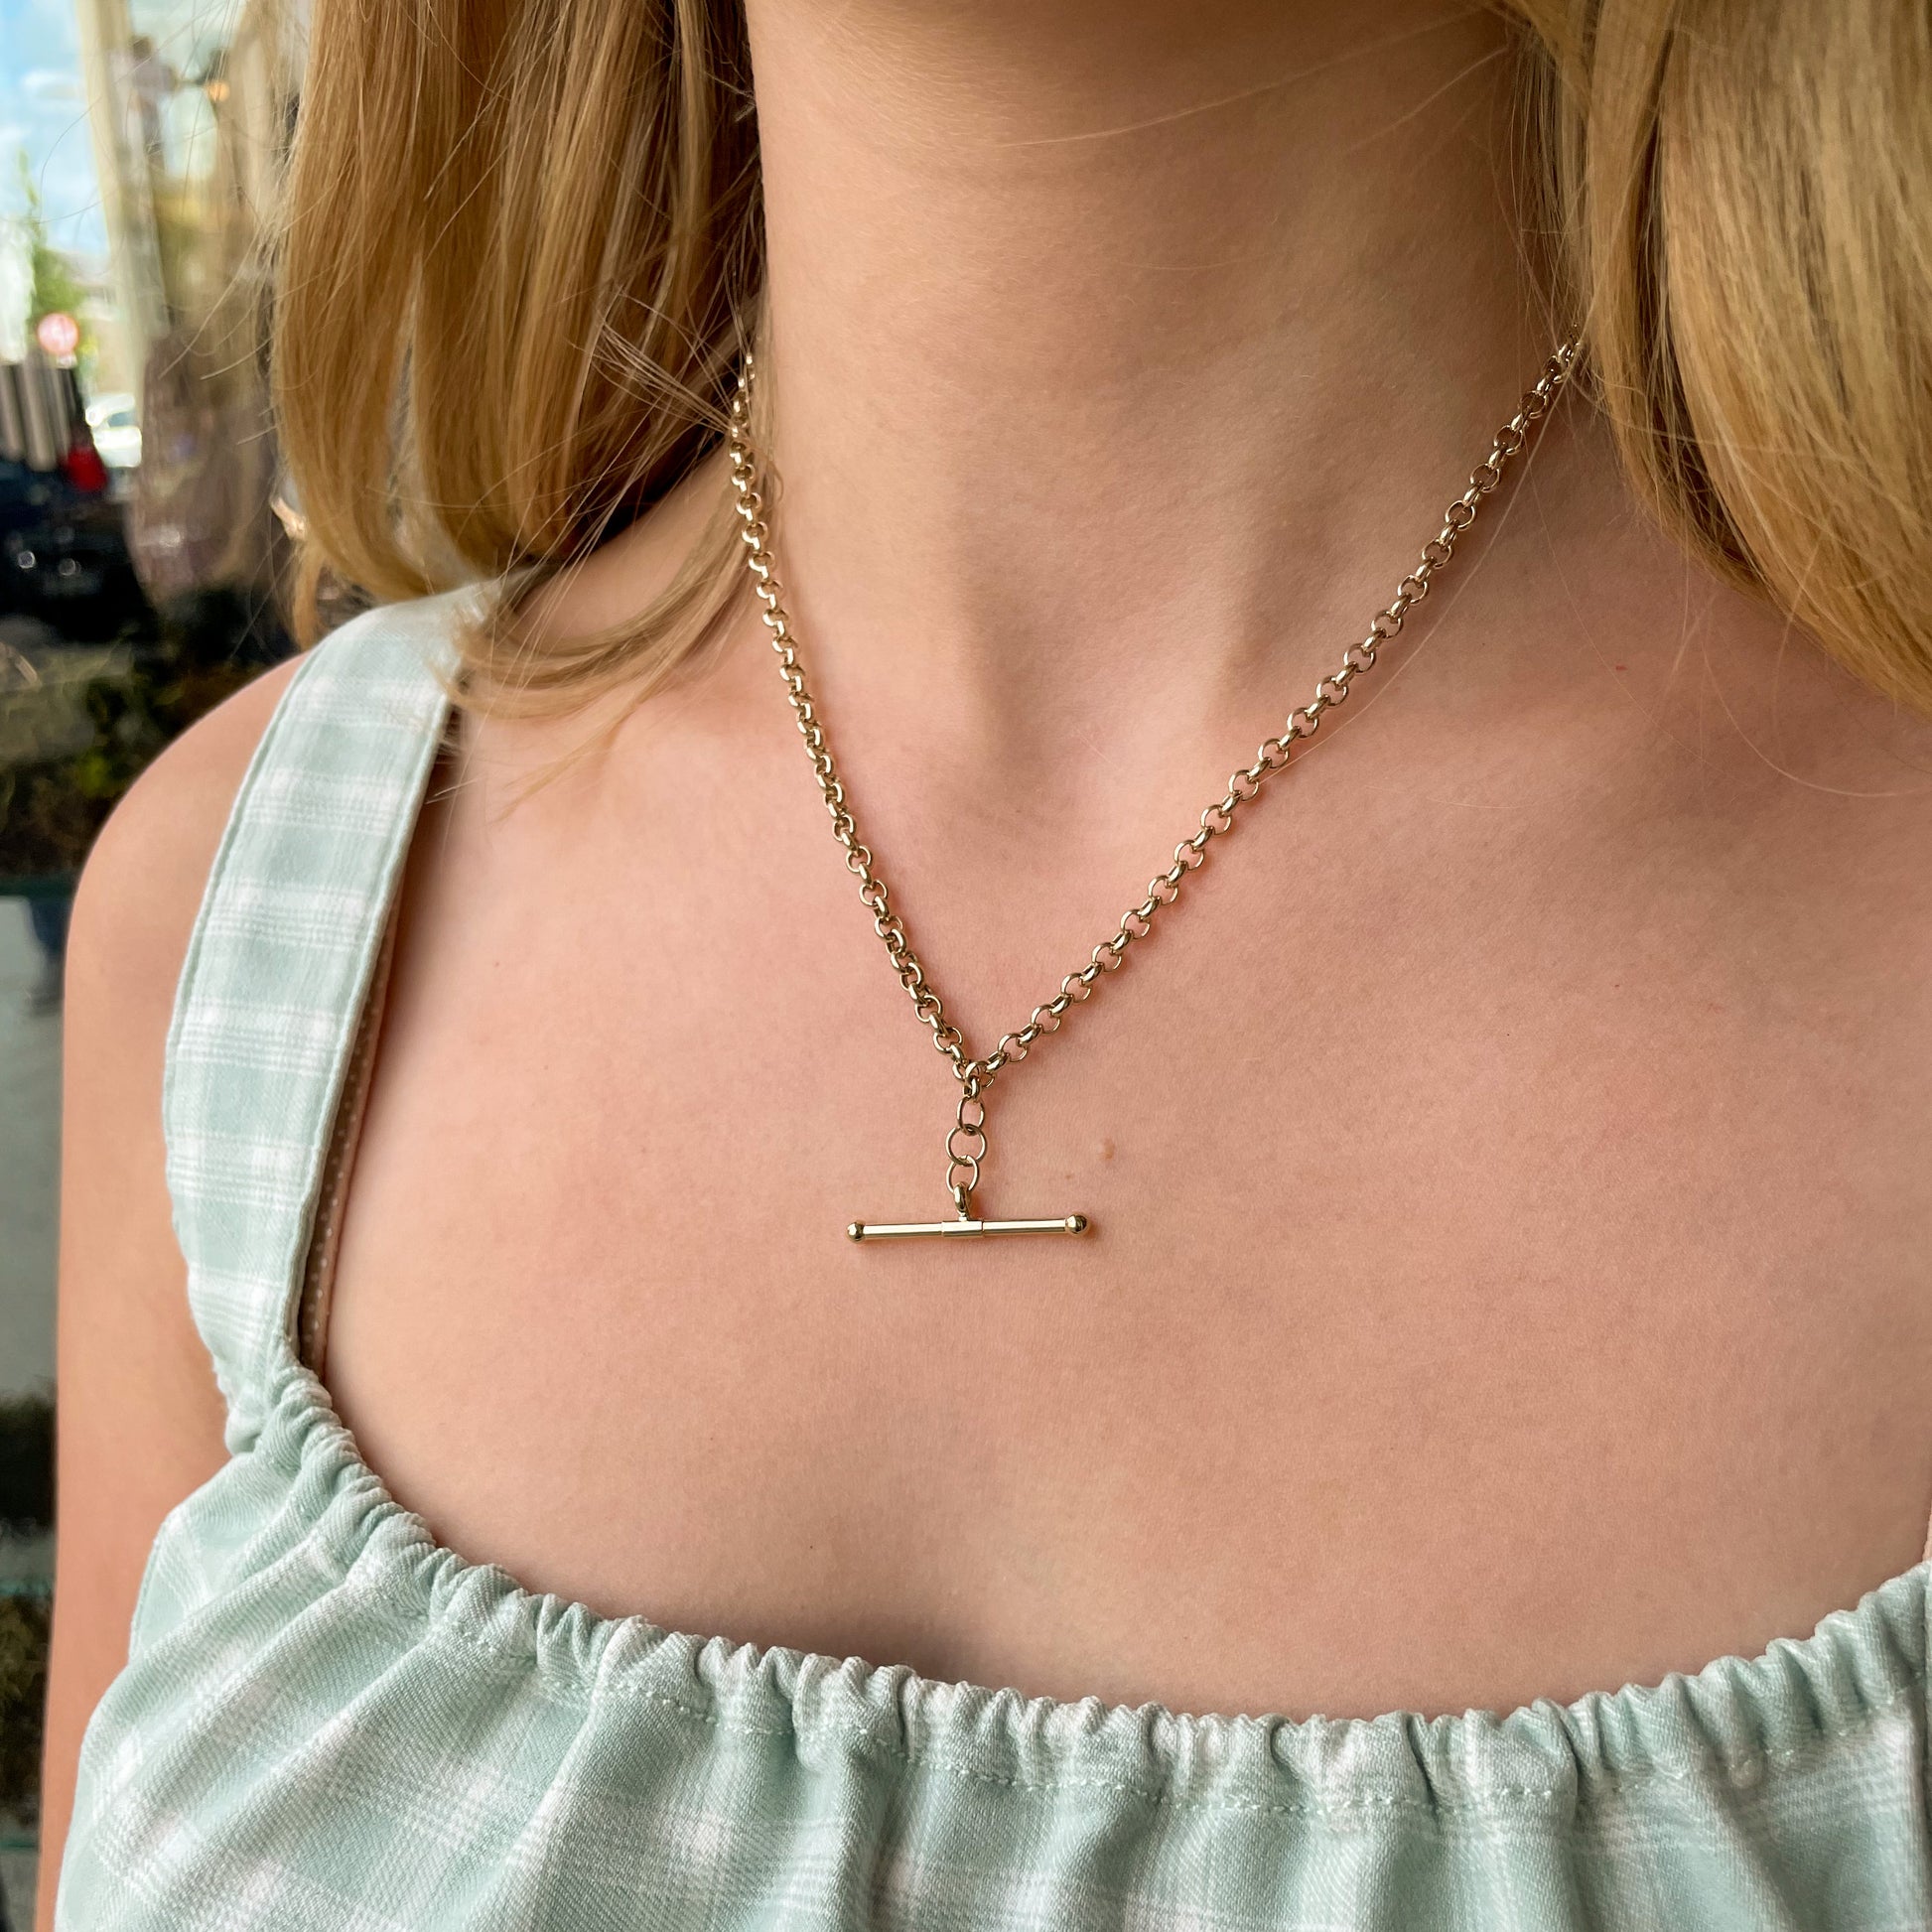 9ct Gold T-Bar Necklace | 43.5cm - John Ross Jewellers